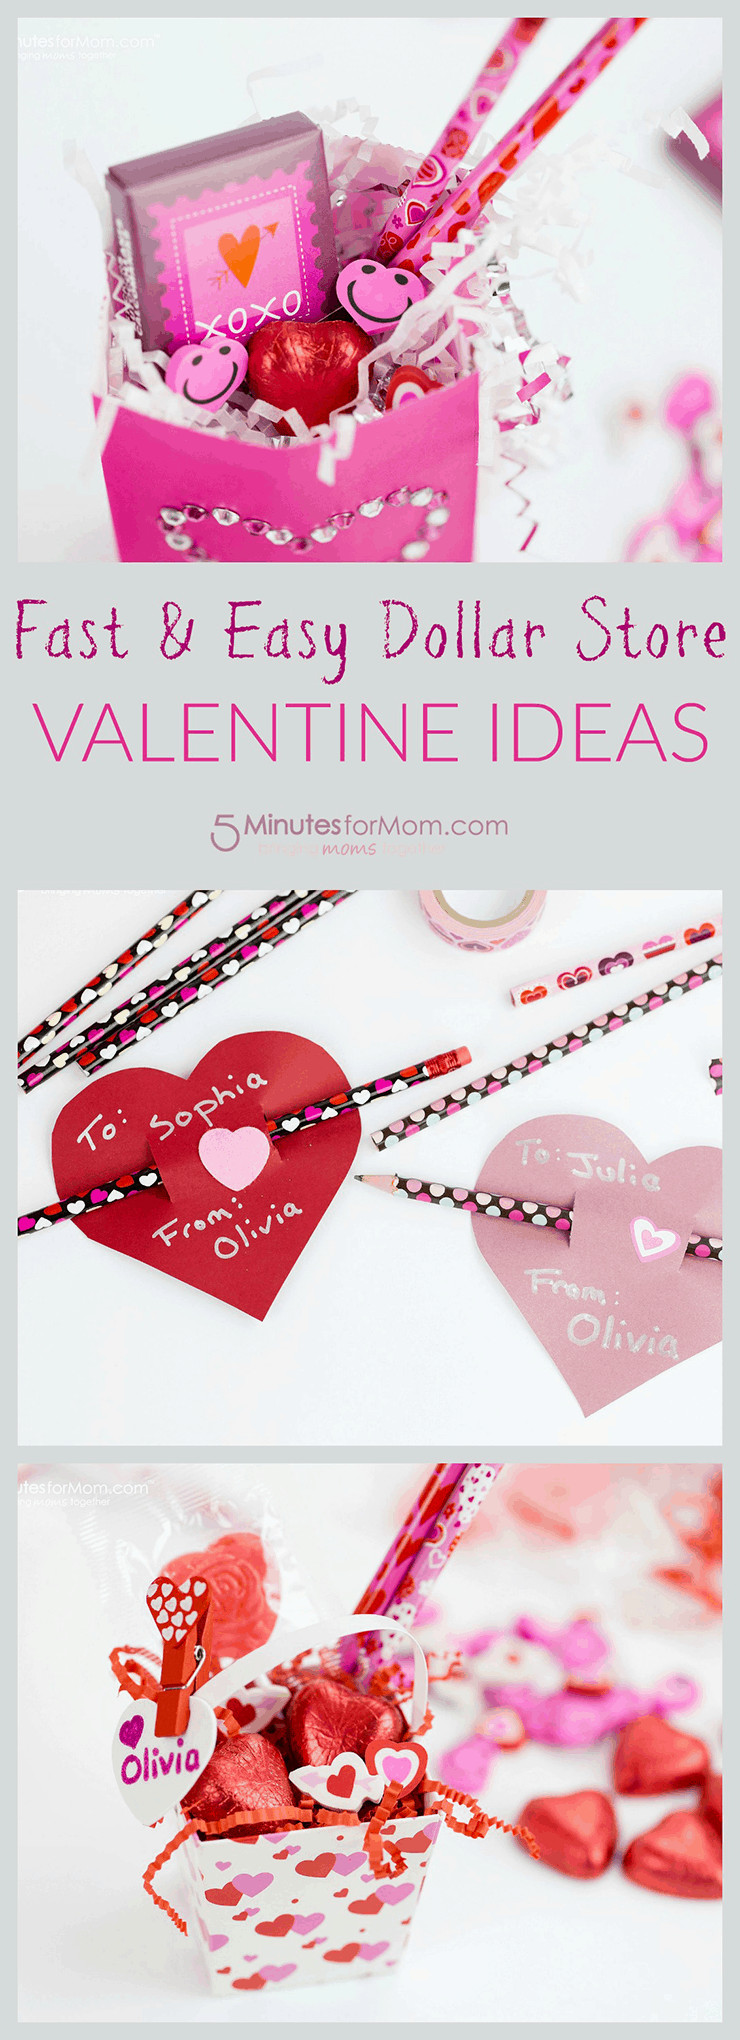 DIY Valentine Gift For Mom
 Fast and Easy Dollar Store Valentine Ideas 5 Minutes for Mom